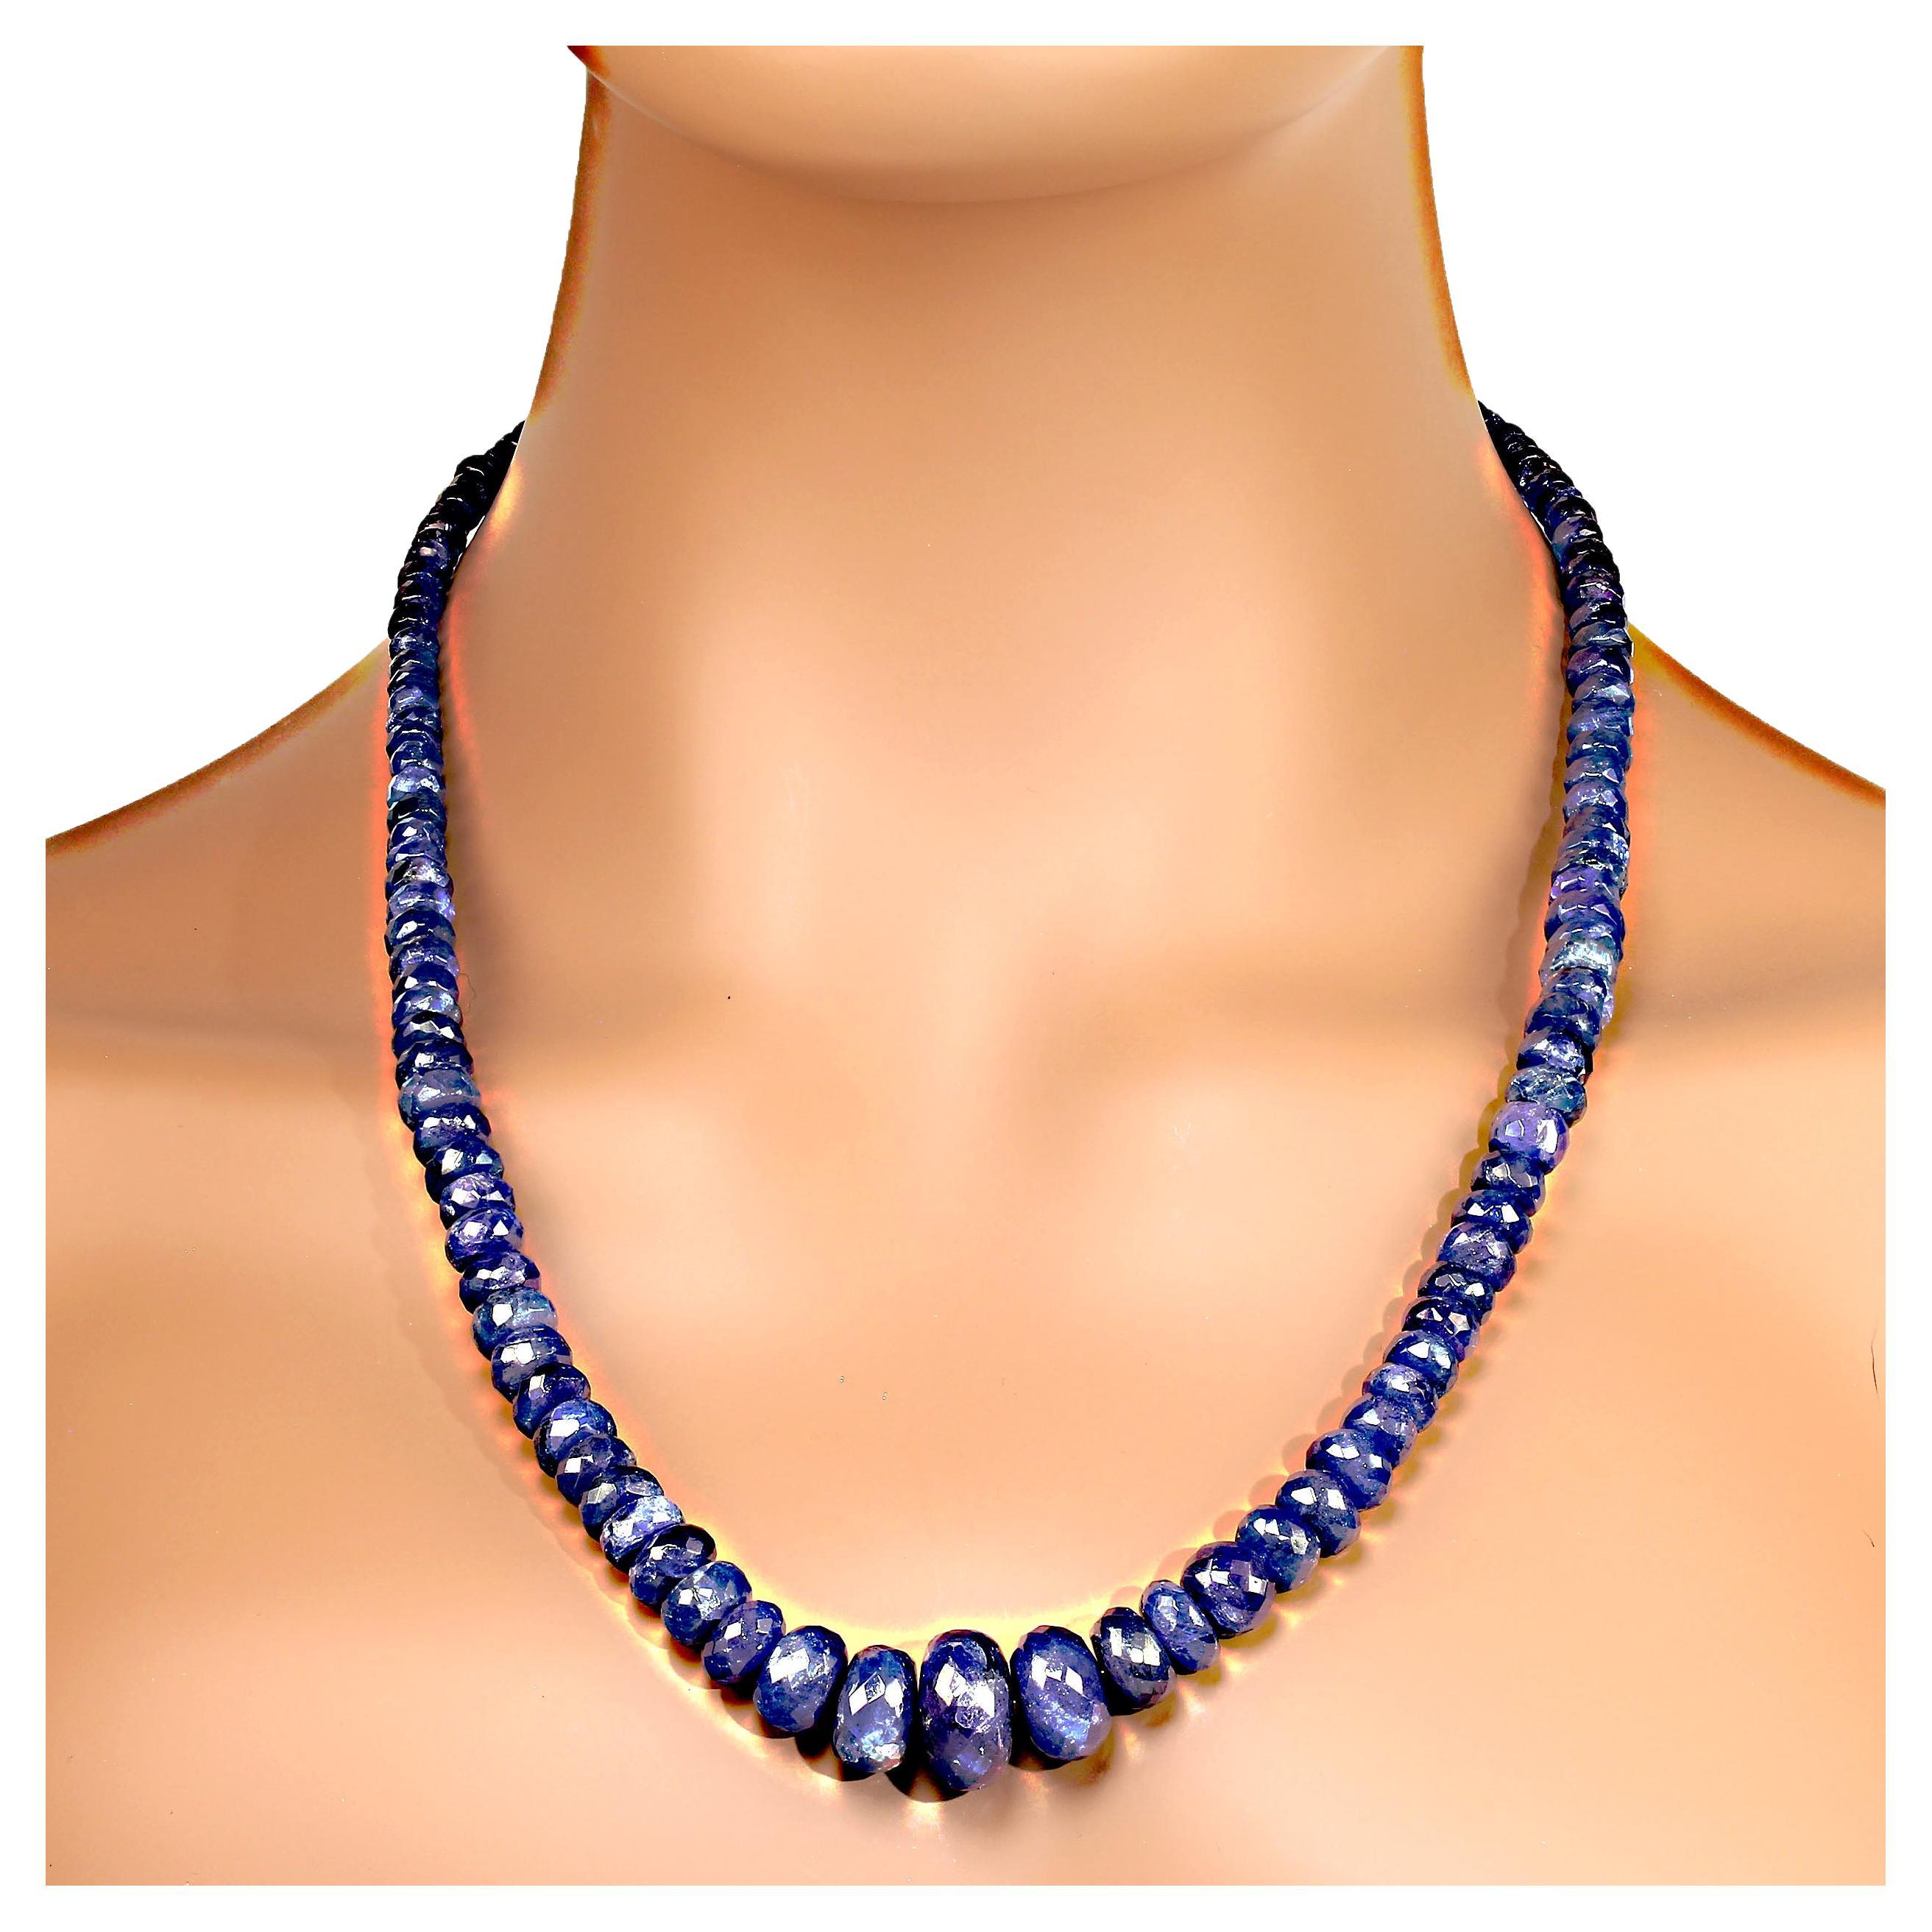 23 Inch translucent tanzanite necklace finished with lobster claw clasp with diamond chips. This lovely necklace is faceted graduated (5-17mm) rondelles of that distinctive tanzanite purpley blue color.  MN2360